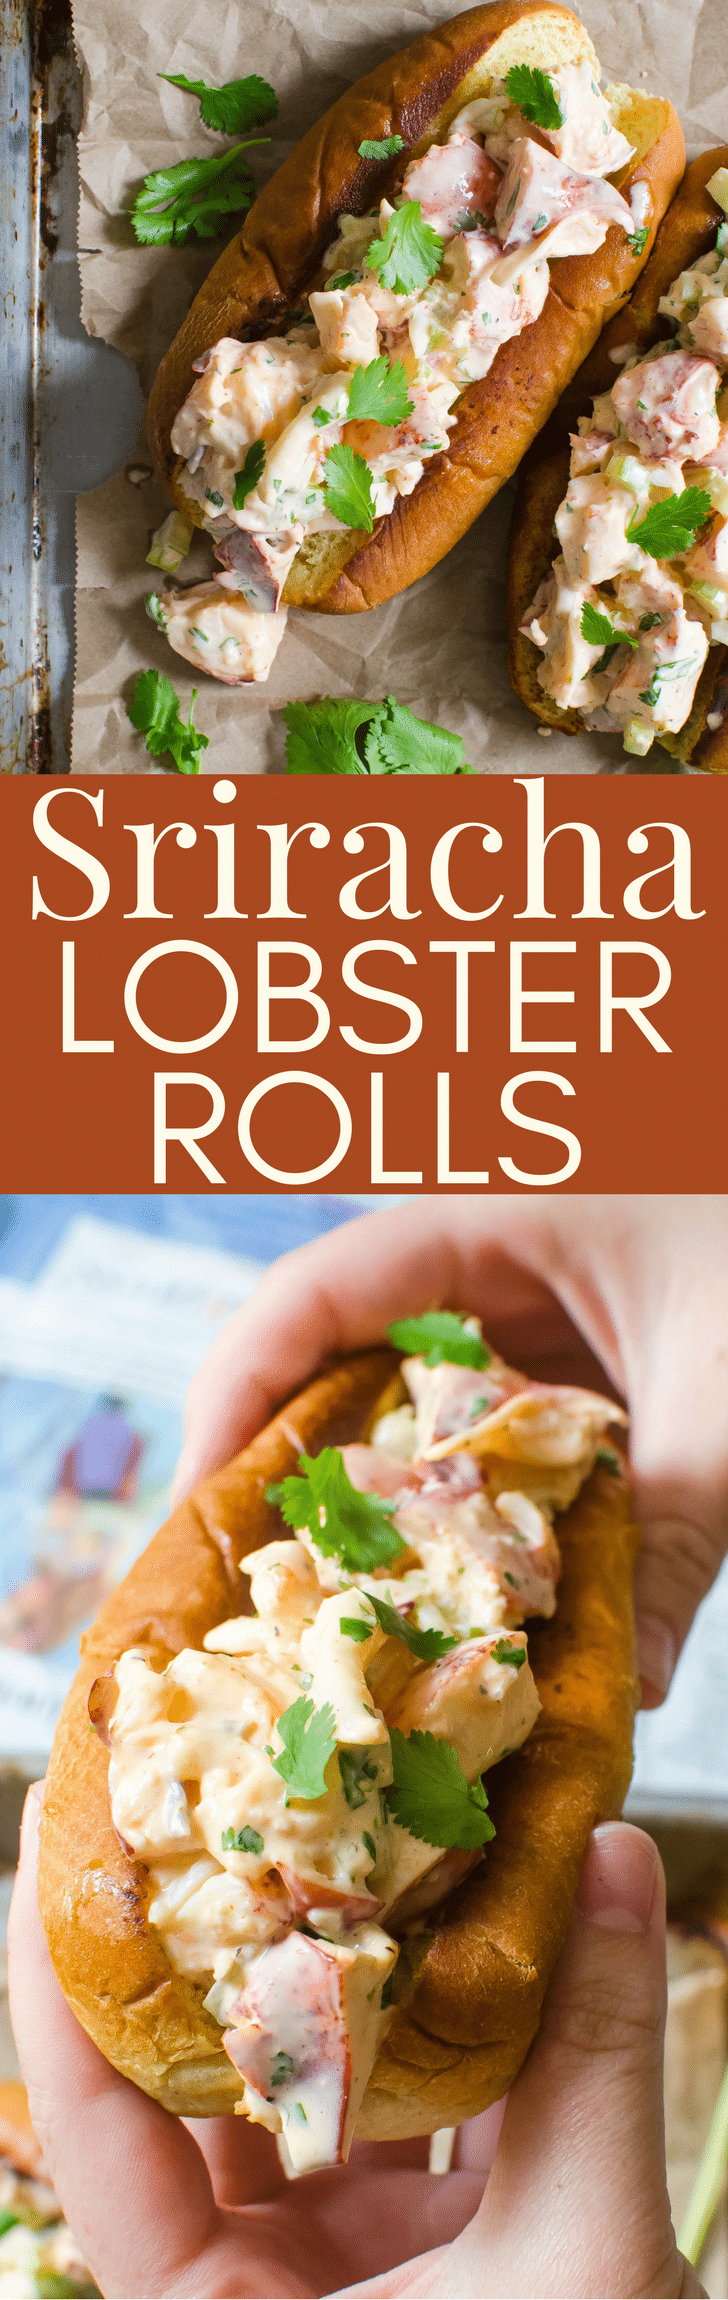 Want a twist on a lobster roll sandwich? Sriracha Lobster Rolls take the authentic lobster roll recipe to a new high! With instructions on how to cook a live lobster and mix up a spicier New England roll. #lobsterroll #newenglandlobsterroll #lobster #howtocooklobster #sandwich #newenglandpatriots #authenticlobsterrolls #sriracha #srirachamayonnaise #lobsterrollrecipe #